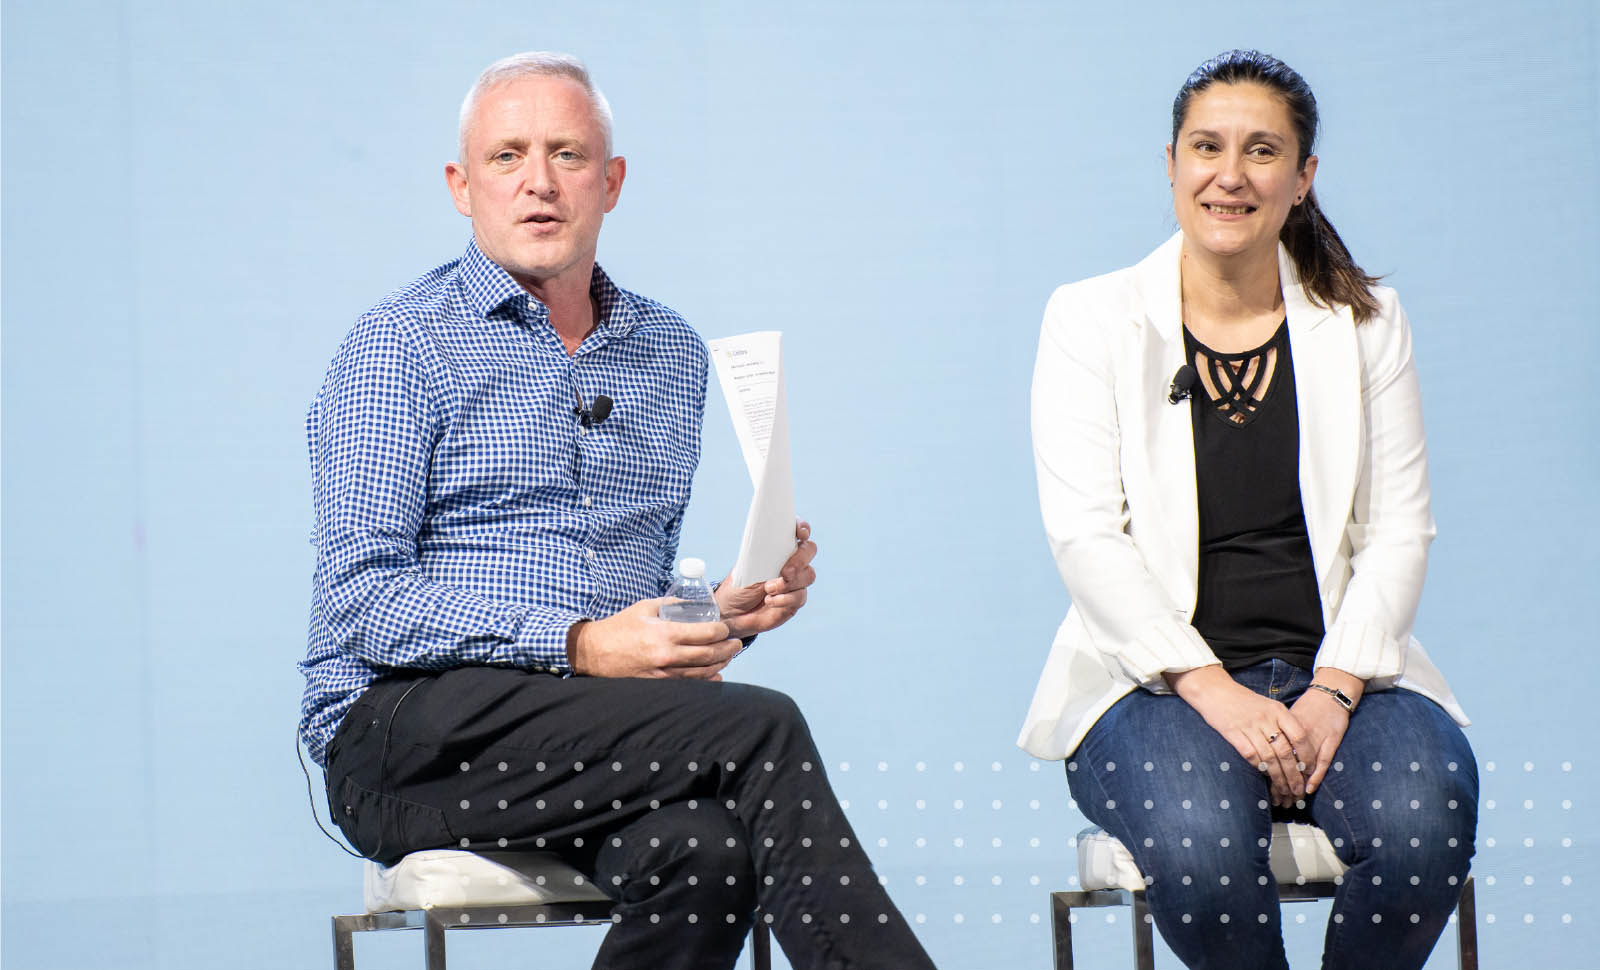 Collibra Chief People Officer Jarlath Doherty and Chief Technology Officer Madalina Tanasie sit on stage talking